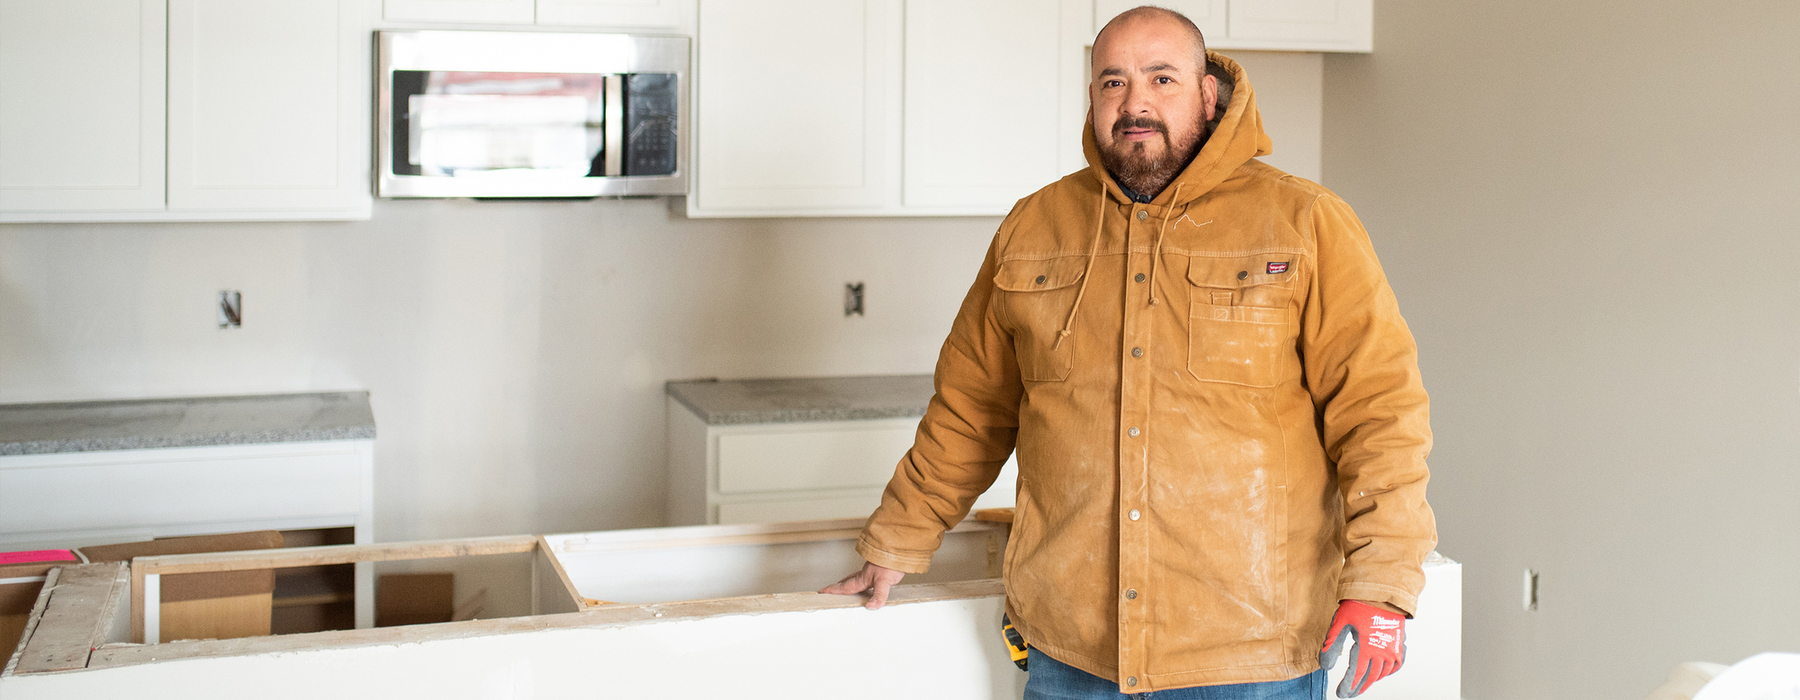 Man stands in front of an unfinished countertop in a kitchen